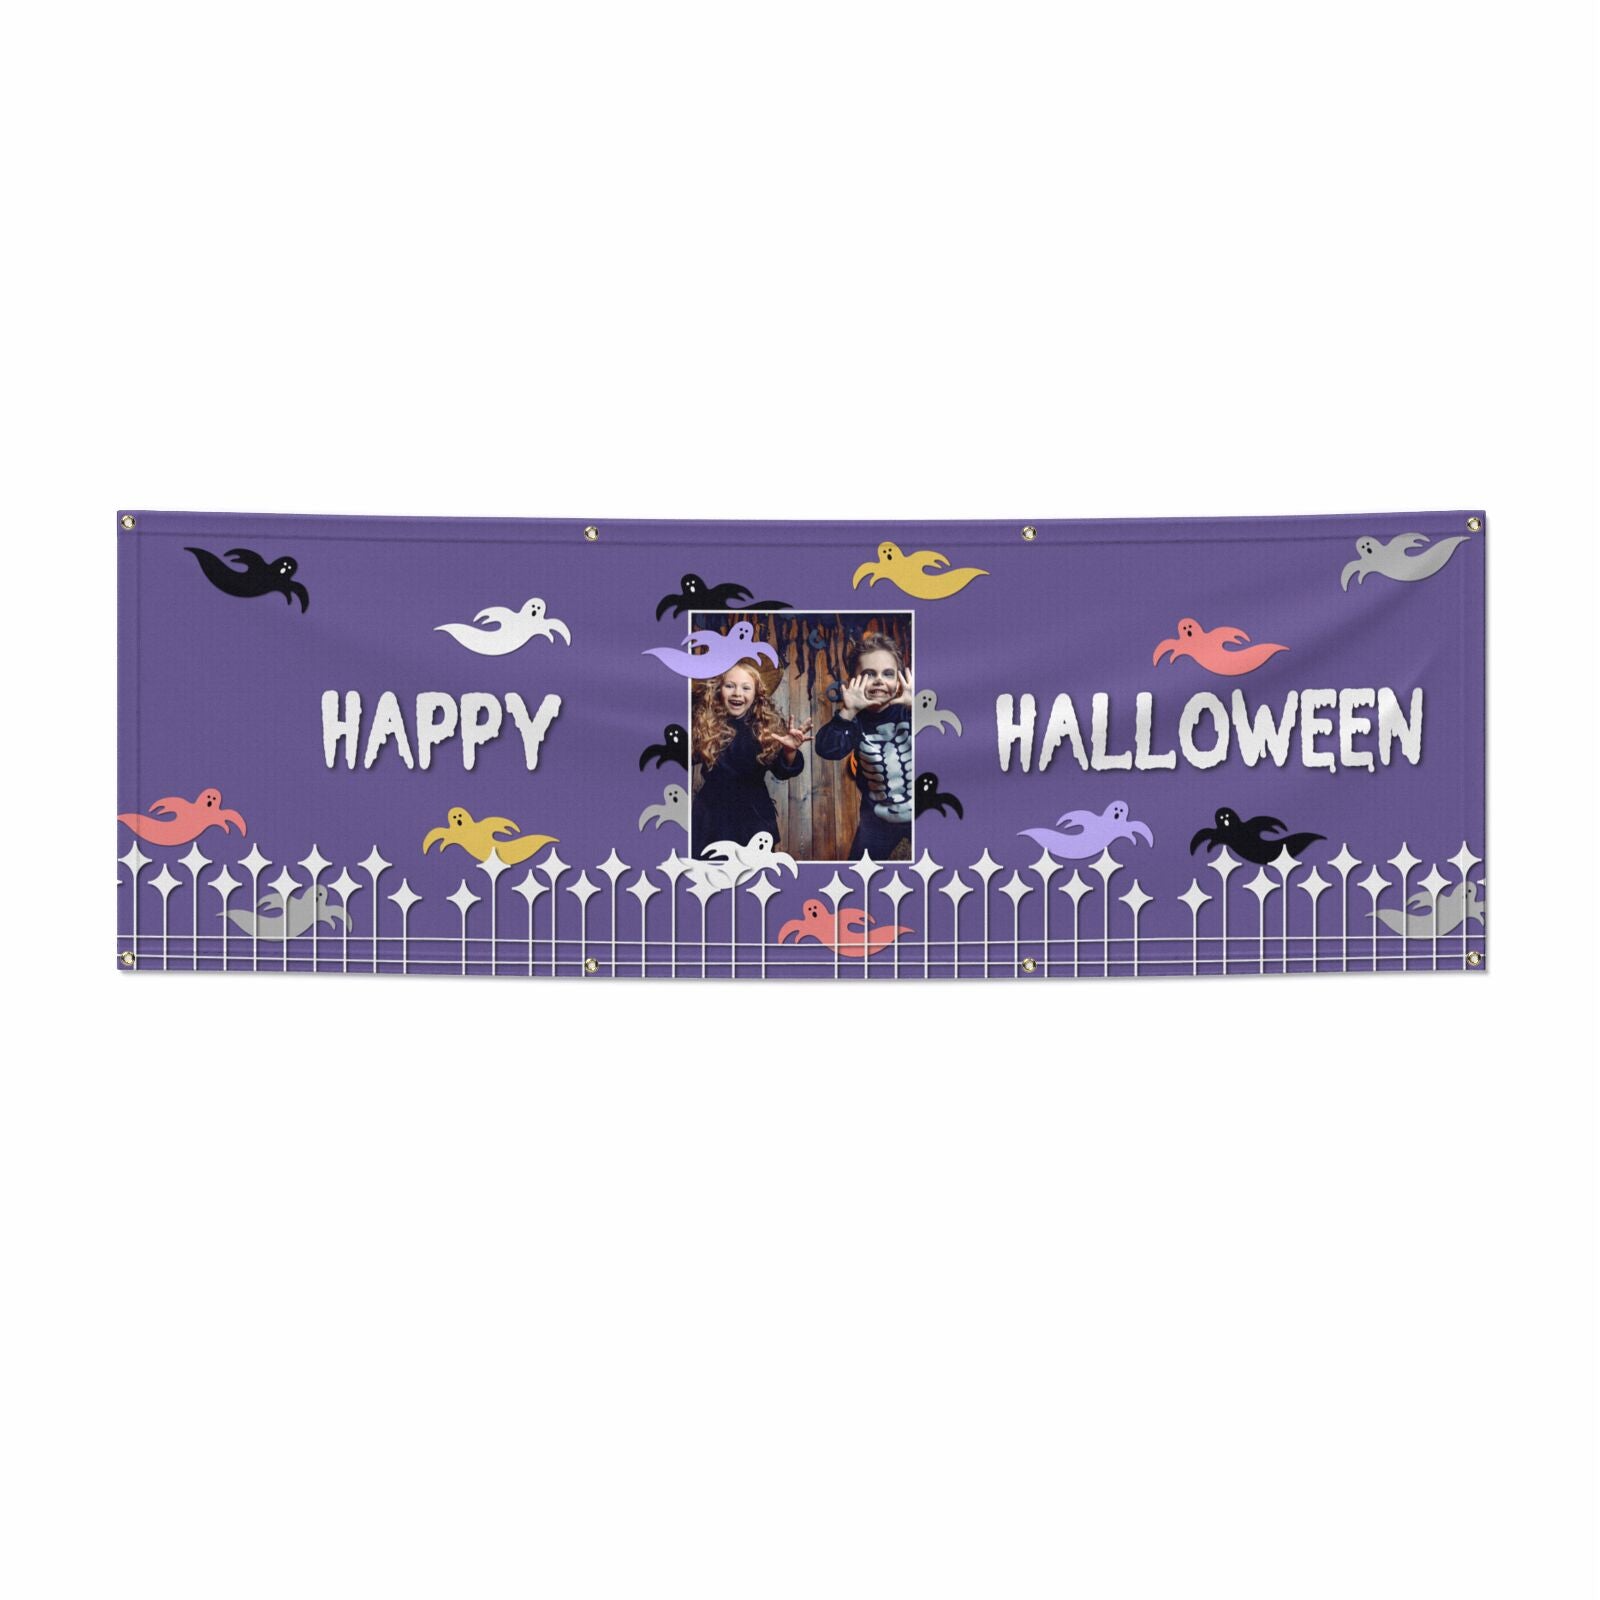 Personalised Halloween Photo Upload 6x2 Vinly Banner with Grommets